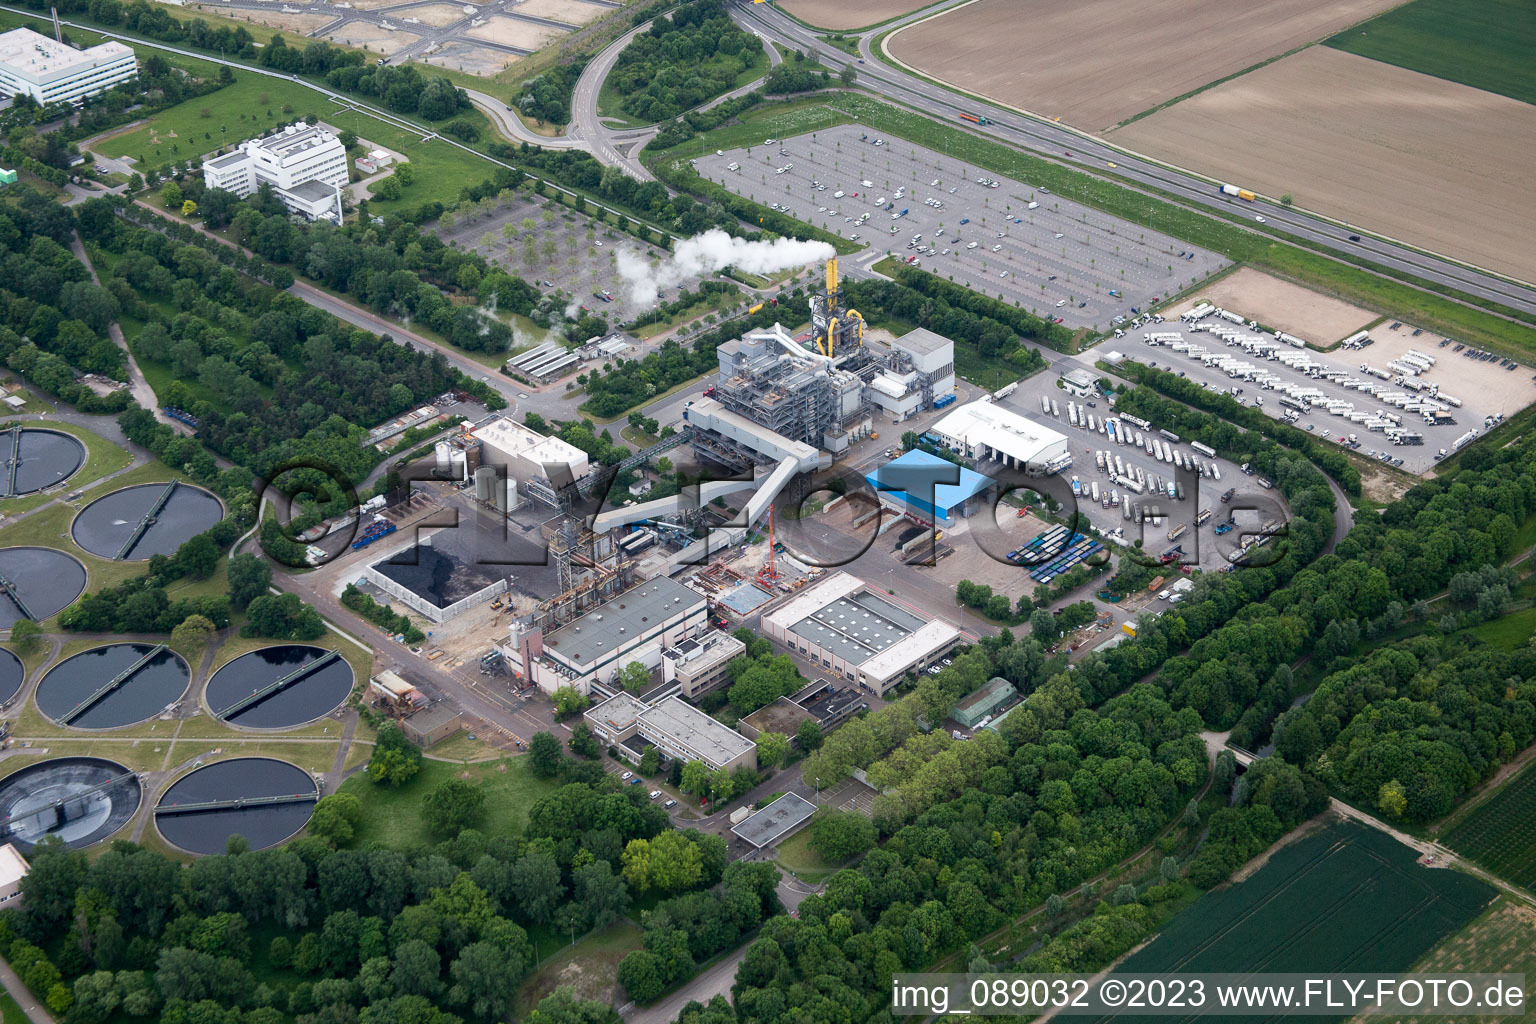 Aerial view of Lanfer logistics in the district Mörsch in Frankenthal in the state Rhineland-Palatinate, Germany